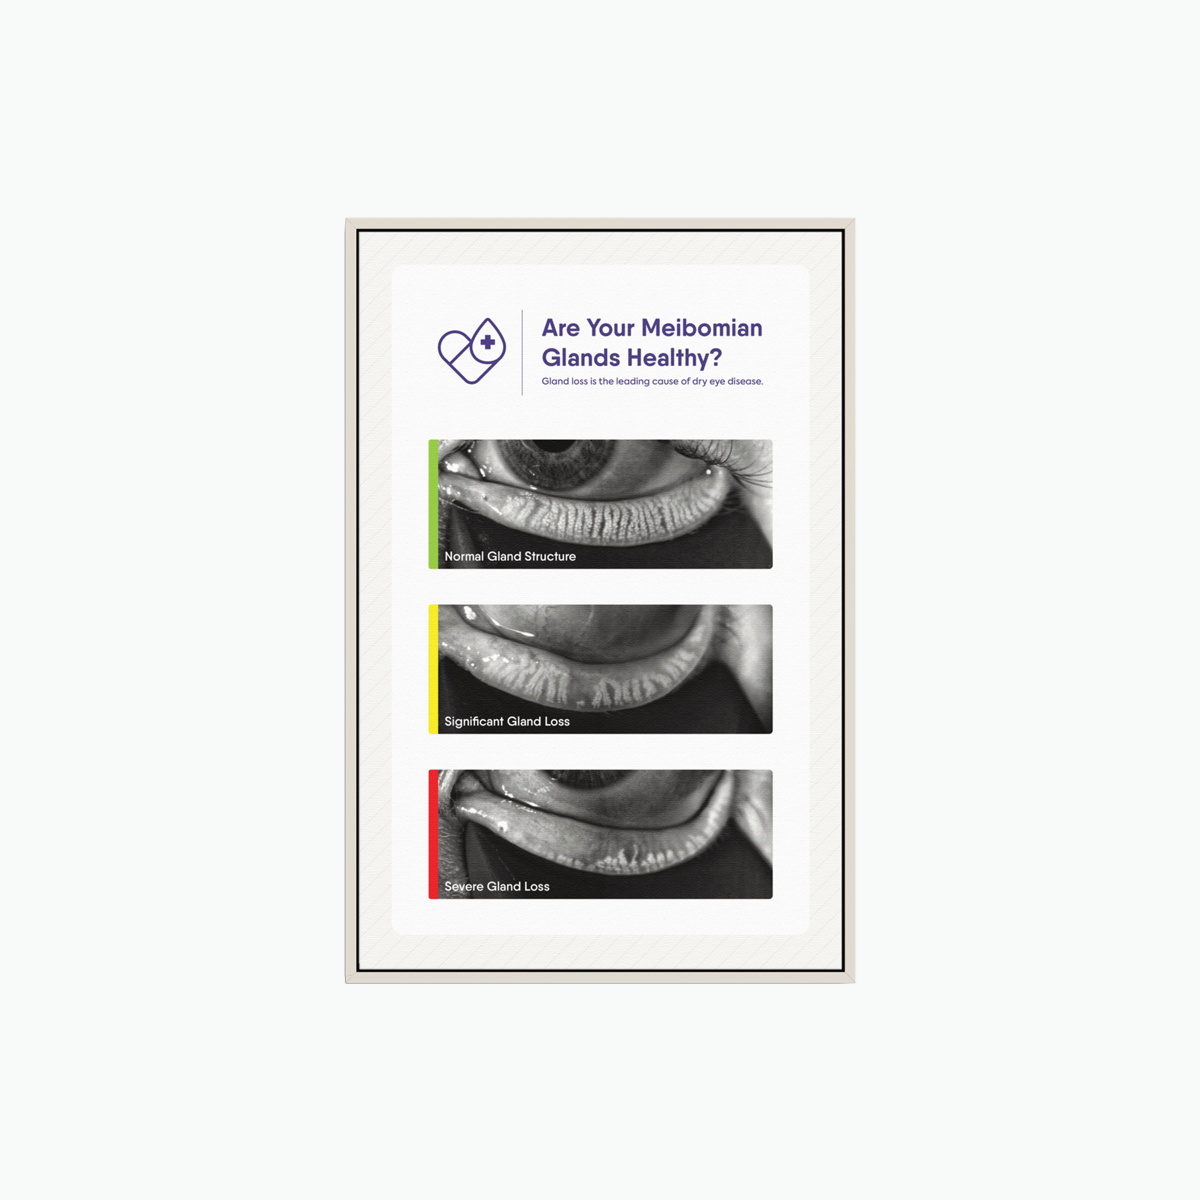 Framed Canvas Meibomian Gland Grading Scale (3 Frame Colors)